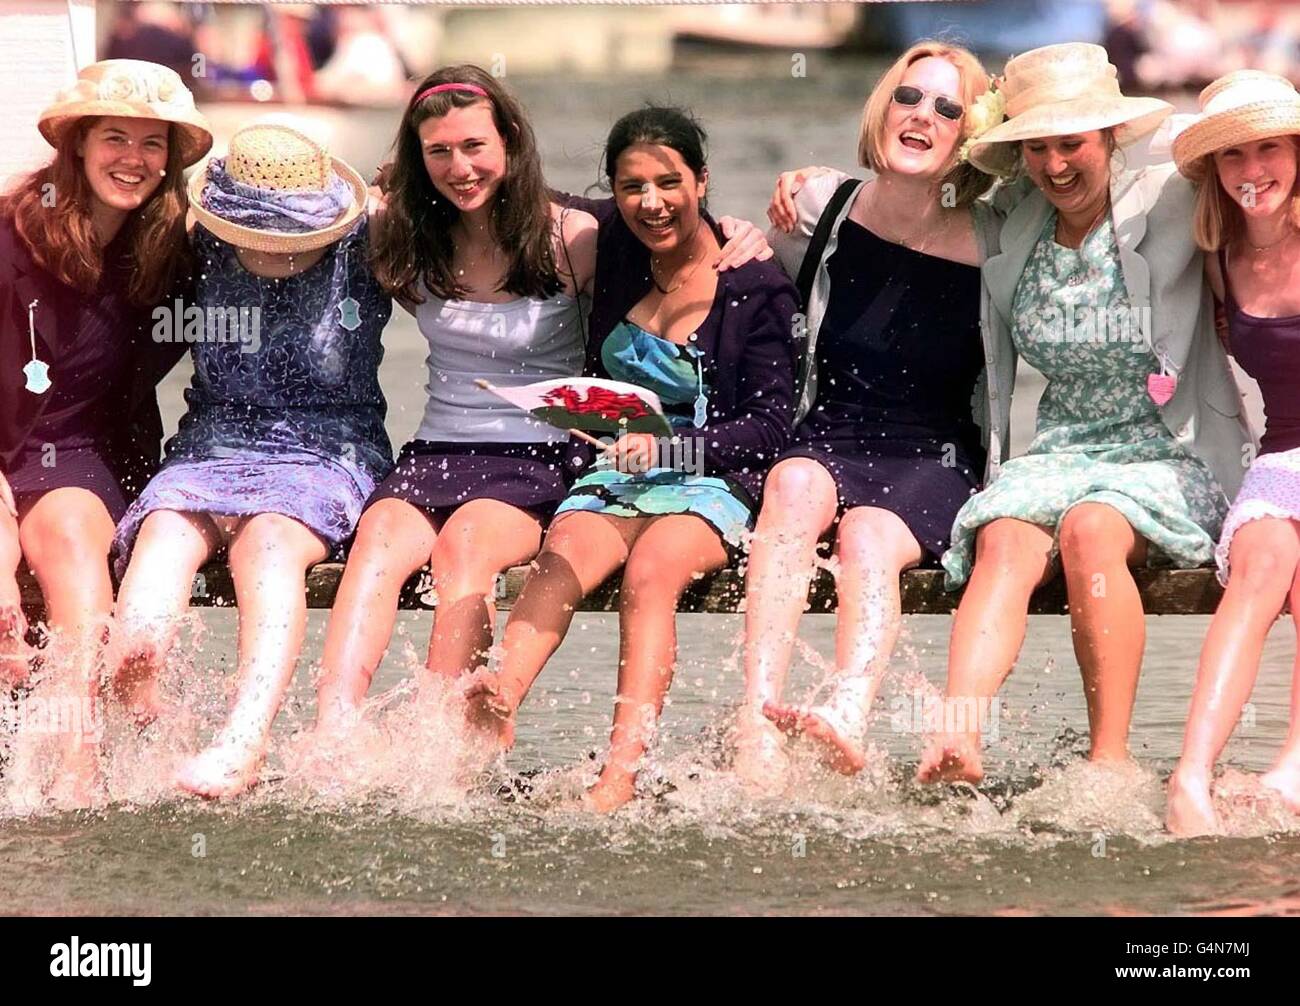 Girls from Haberdasher's Monmouth School for Girls, cool down in the Thames at Henley, Oxfordshire on the first day on the first day of the traditional summer event the 150th Royal Regatta, an annual event. * The Henley Regatta has only been cancelled eleven times in it s history due to the two World Wars, and attracts the world s elite rowers. It is one of the social events of the summer. Stock Photo